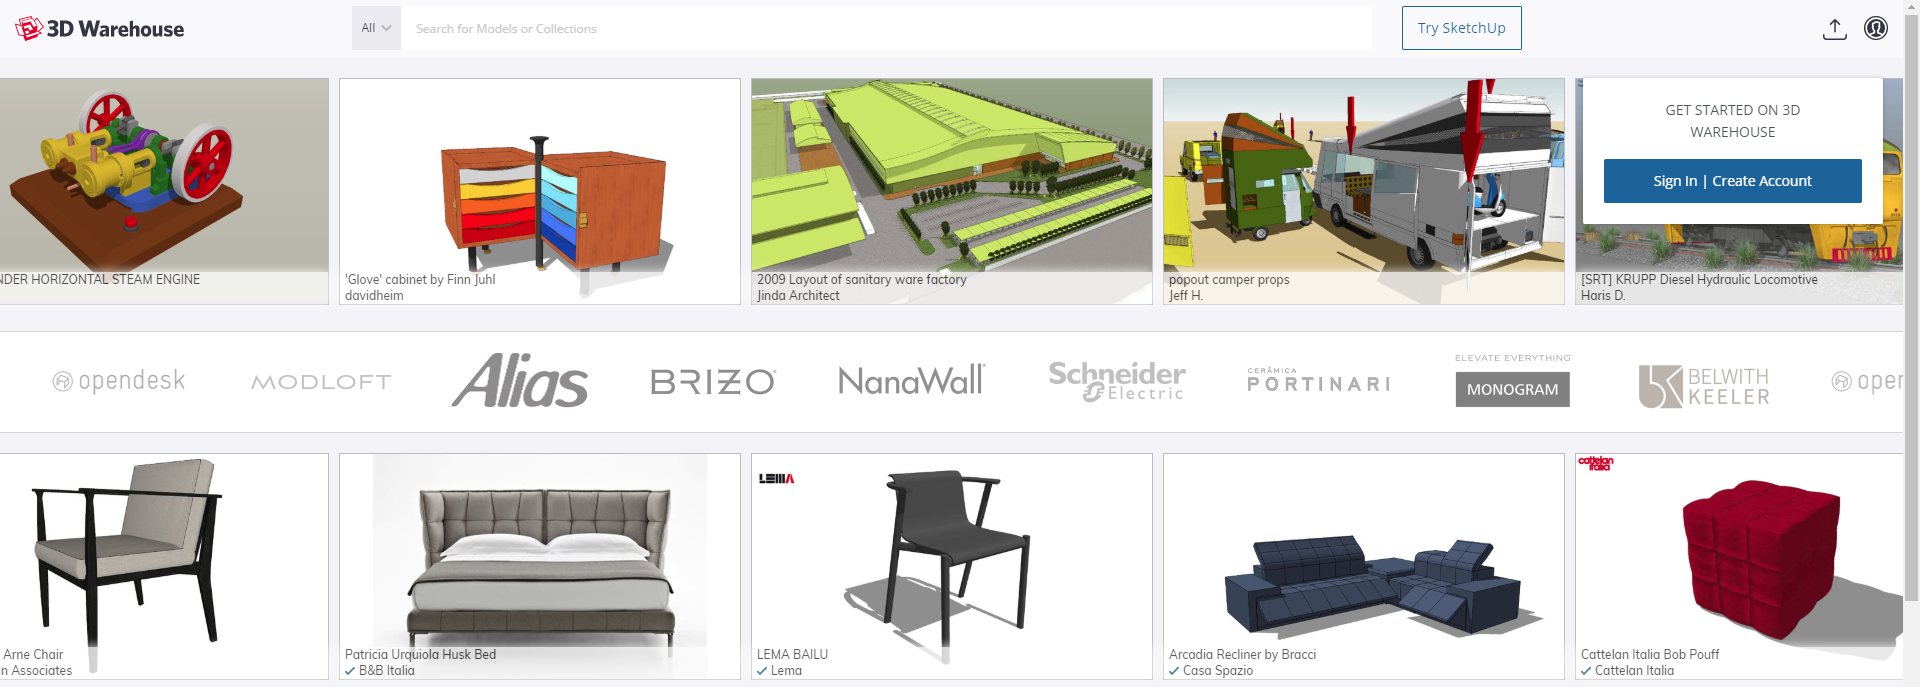 3D Warehouse Opens for Revit > ENGINEERING.com